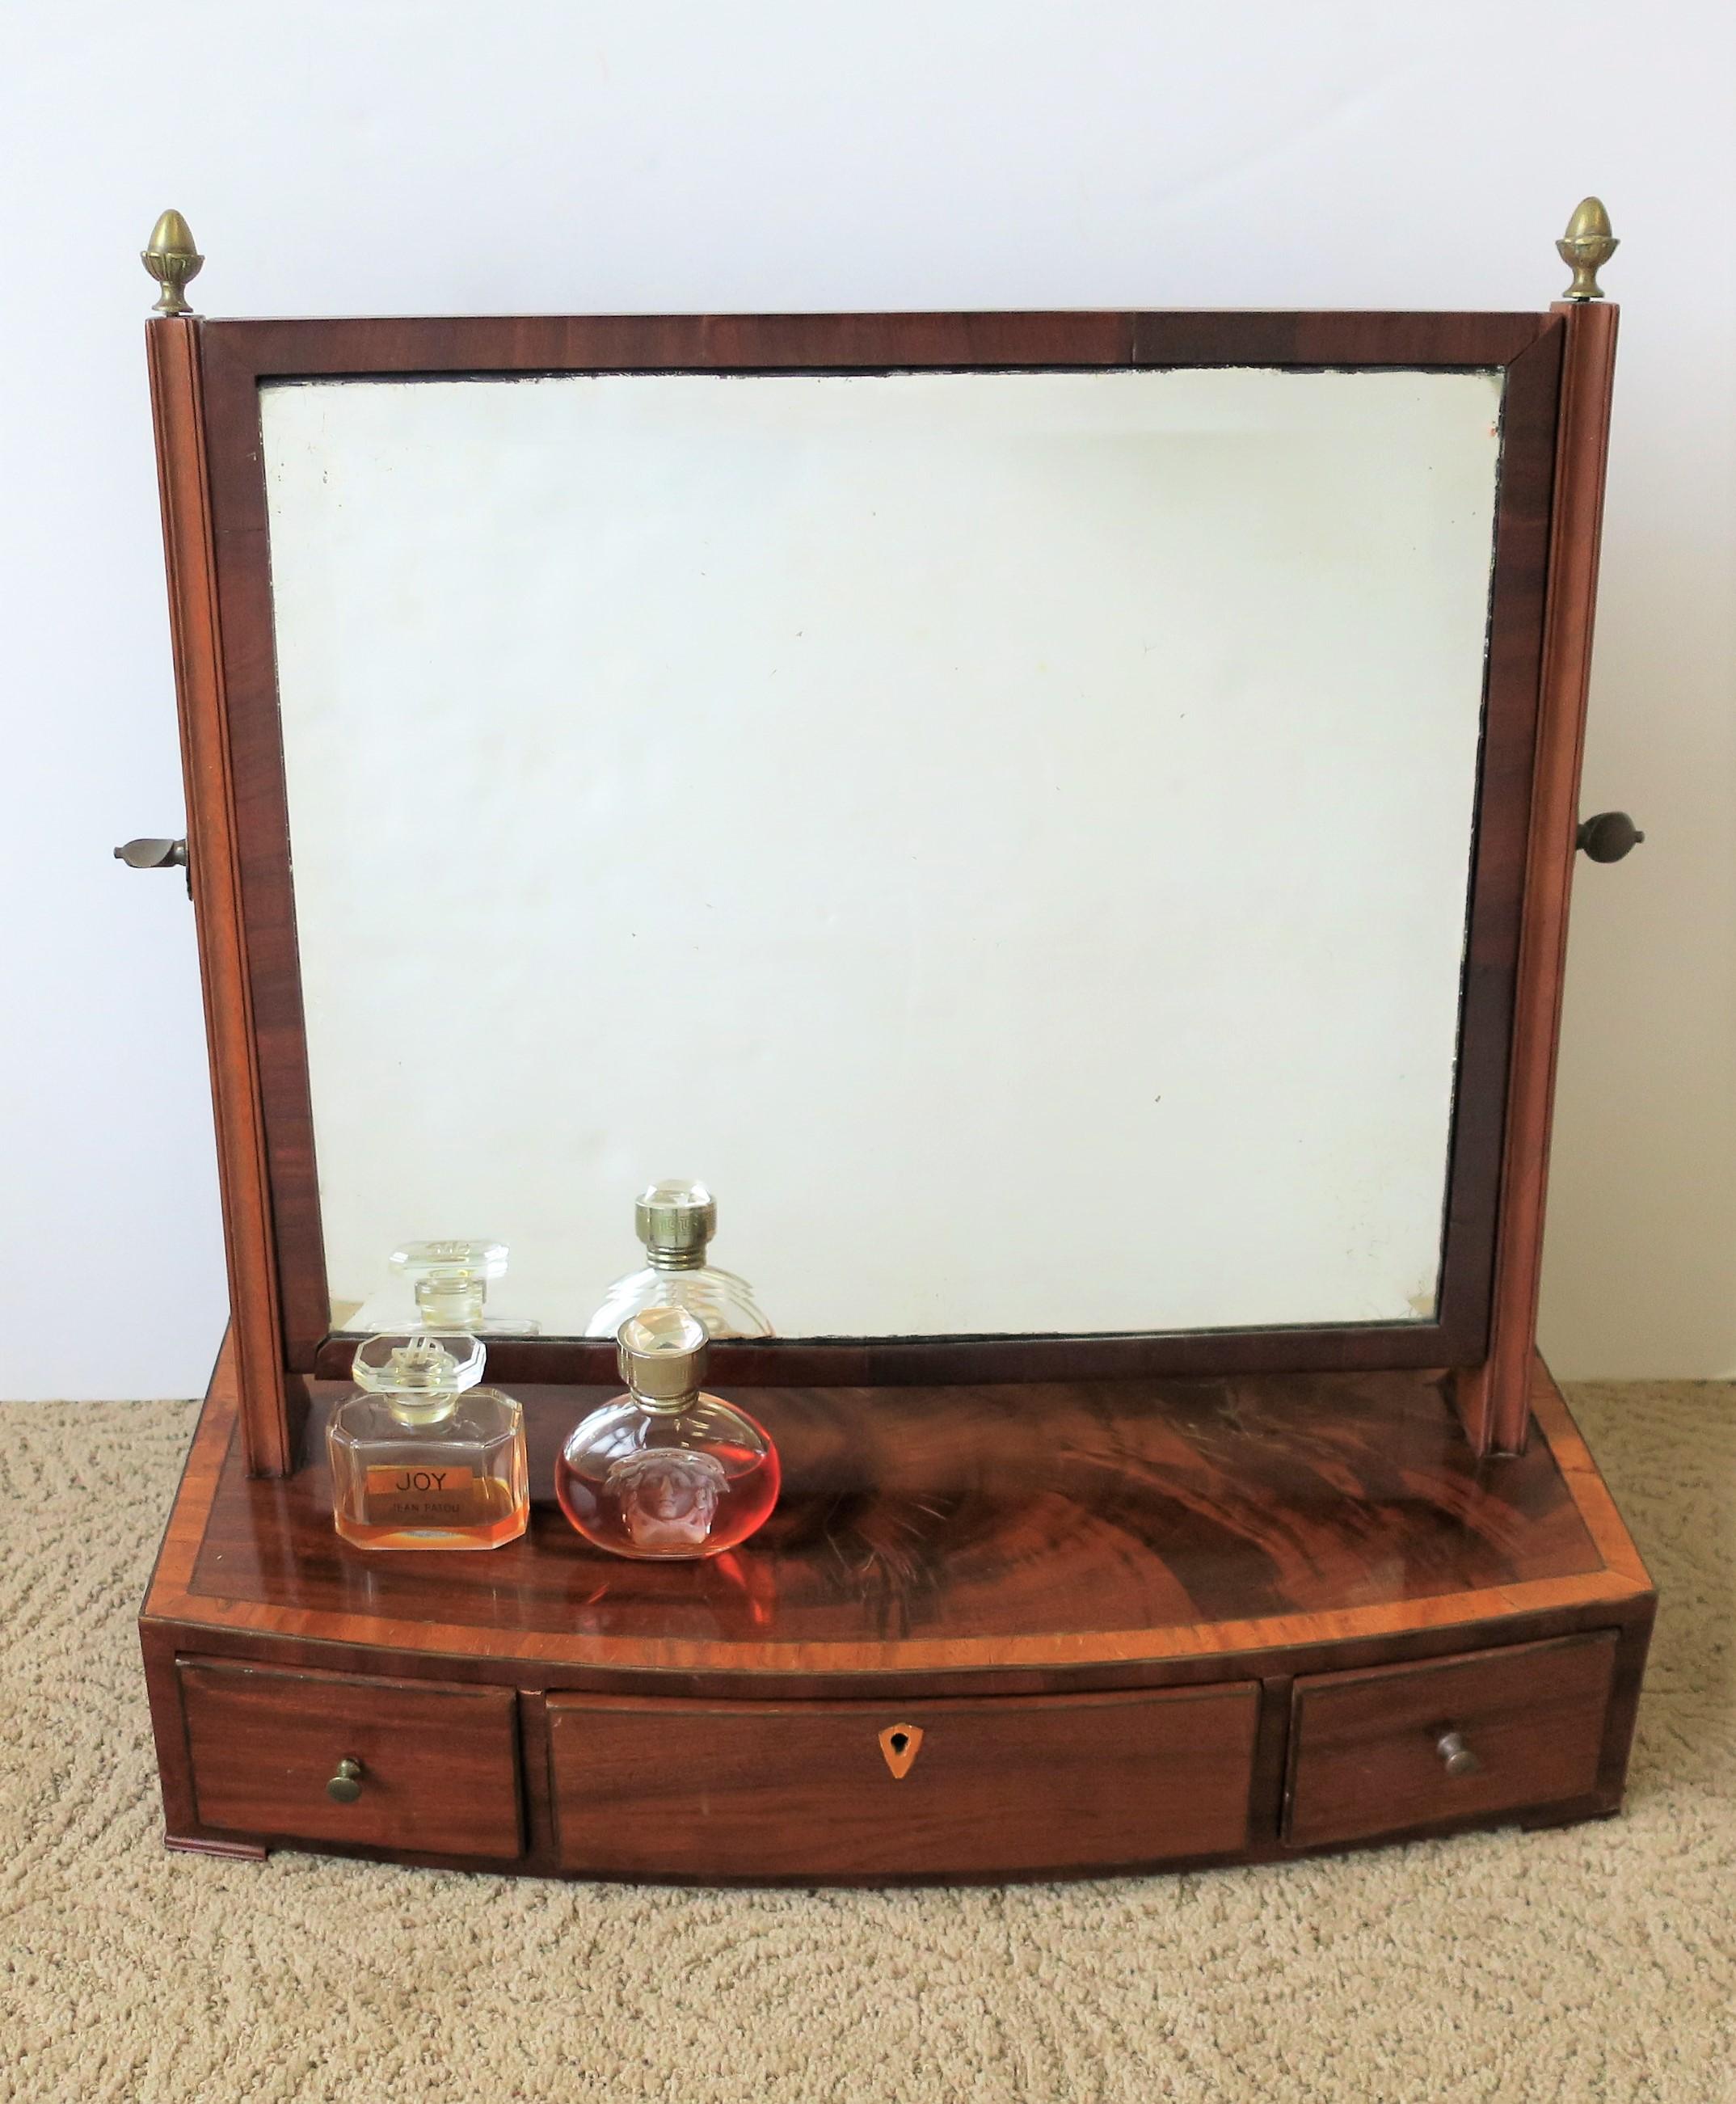 A beautiful and rich antique vanity or dressing mirror with three draws, circa 19th - early 20th Century. Mirror is square with beveled edge, directional flexebilty (north and south), and brass finials on top on both sides. Left and right side draws